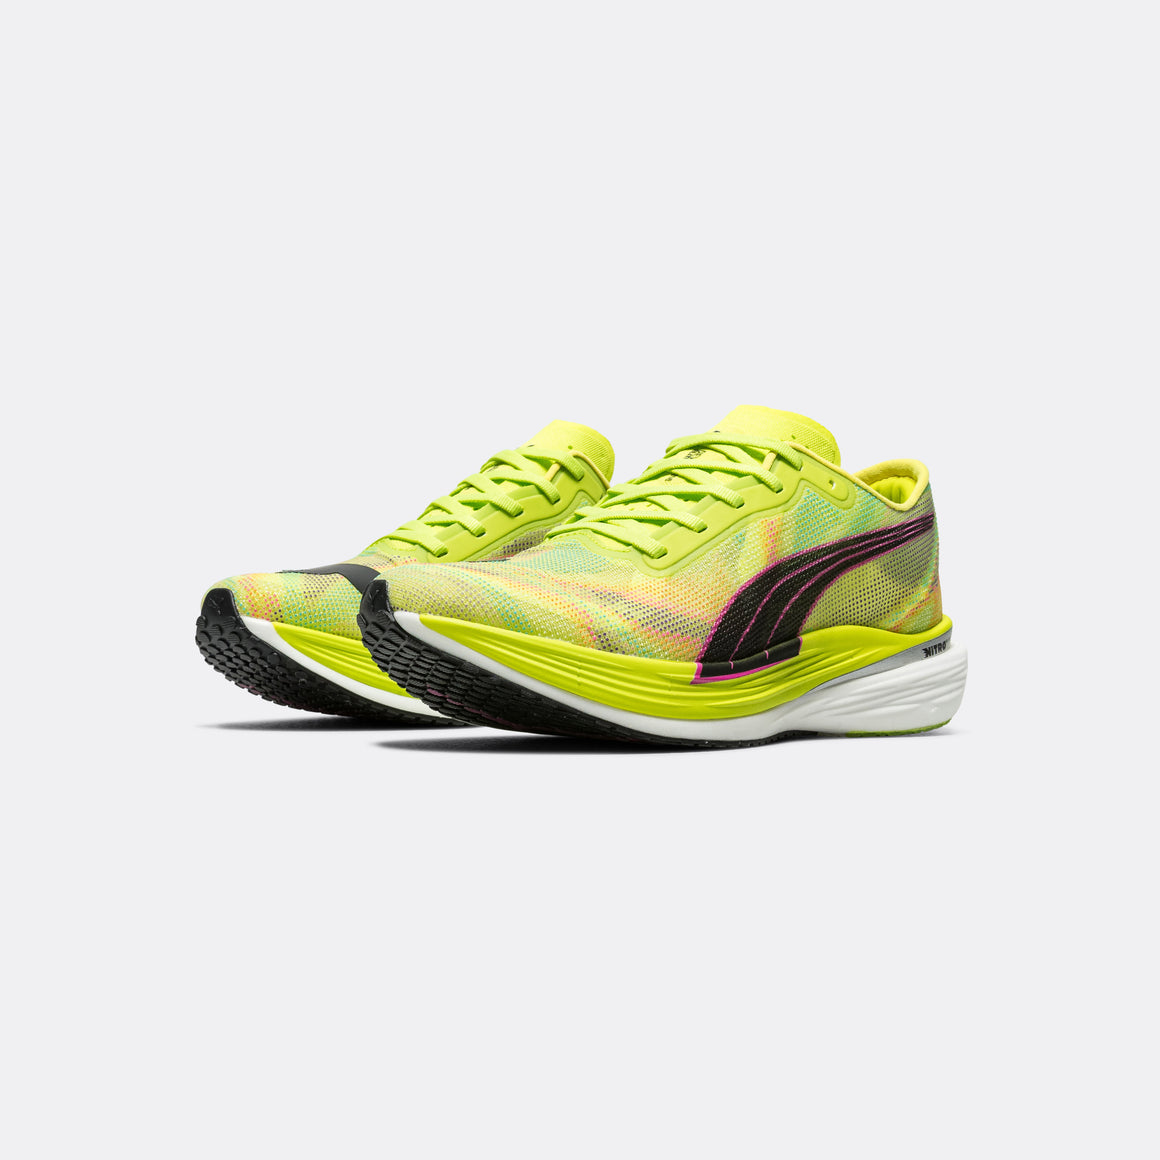 Puma - Womens Deviate NITRO Elite 2 - Psychedelic Rush/Lime - Up There Athletics